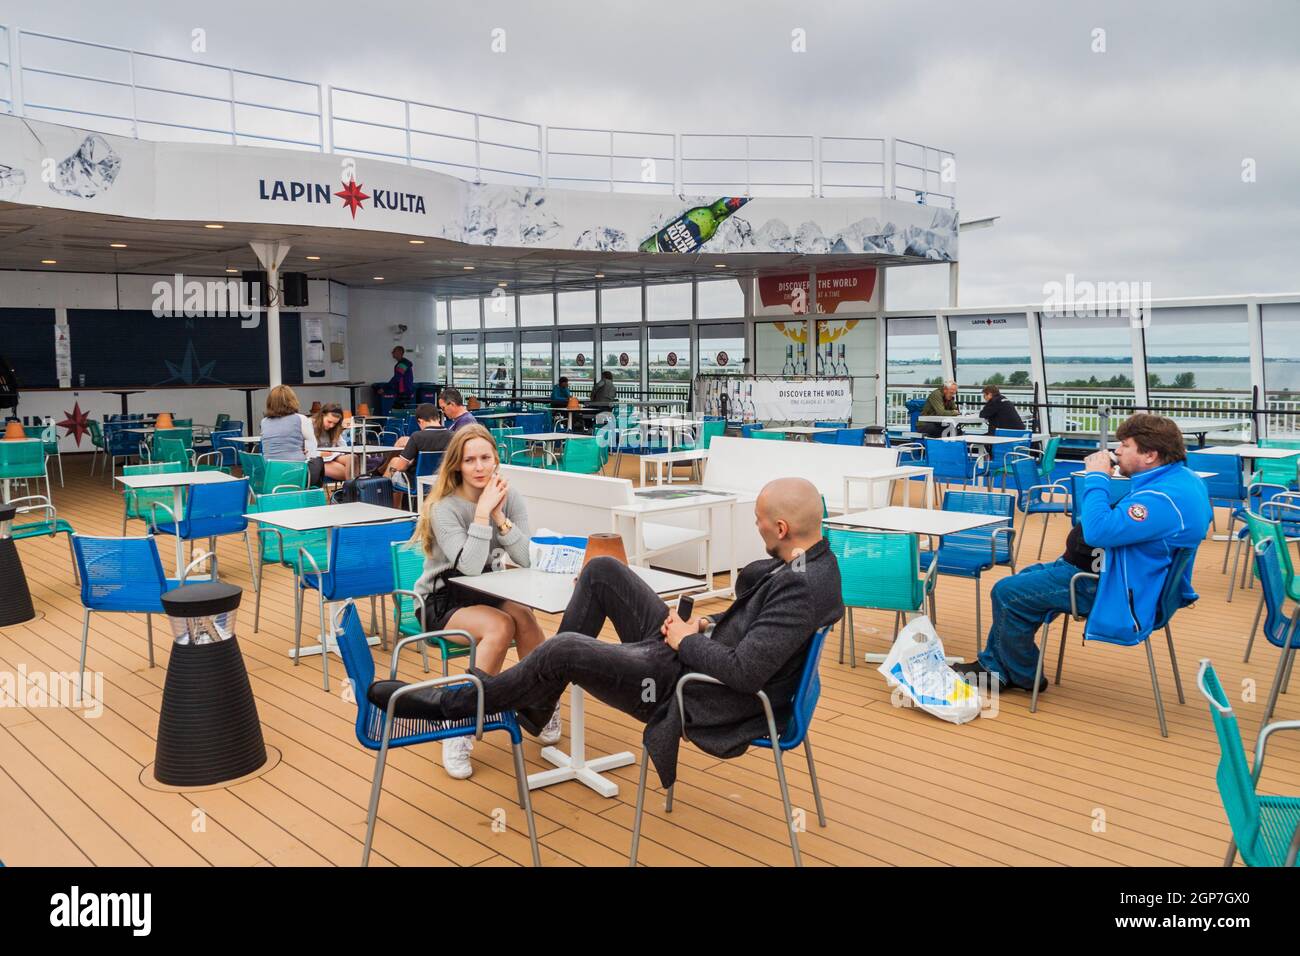 TALLINN, ESTONIA - AUGUST 24, 2016: Deck of MS Finlandia cruiseferry owned and operated by the Finnish ferry operator Eckero Line in the harbor of Tal Stock Photo